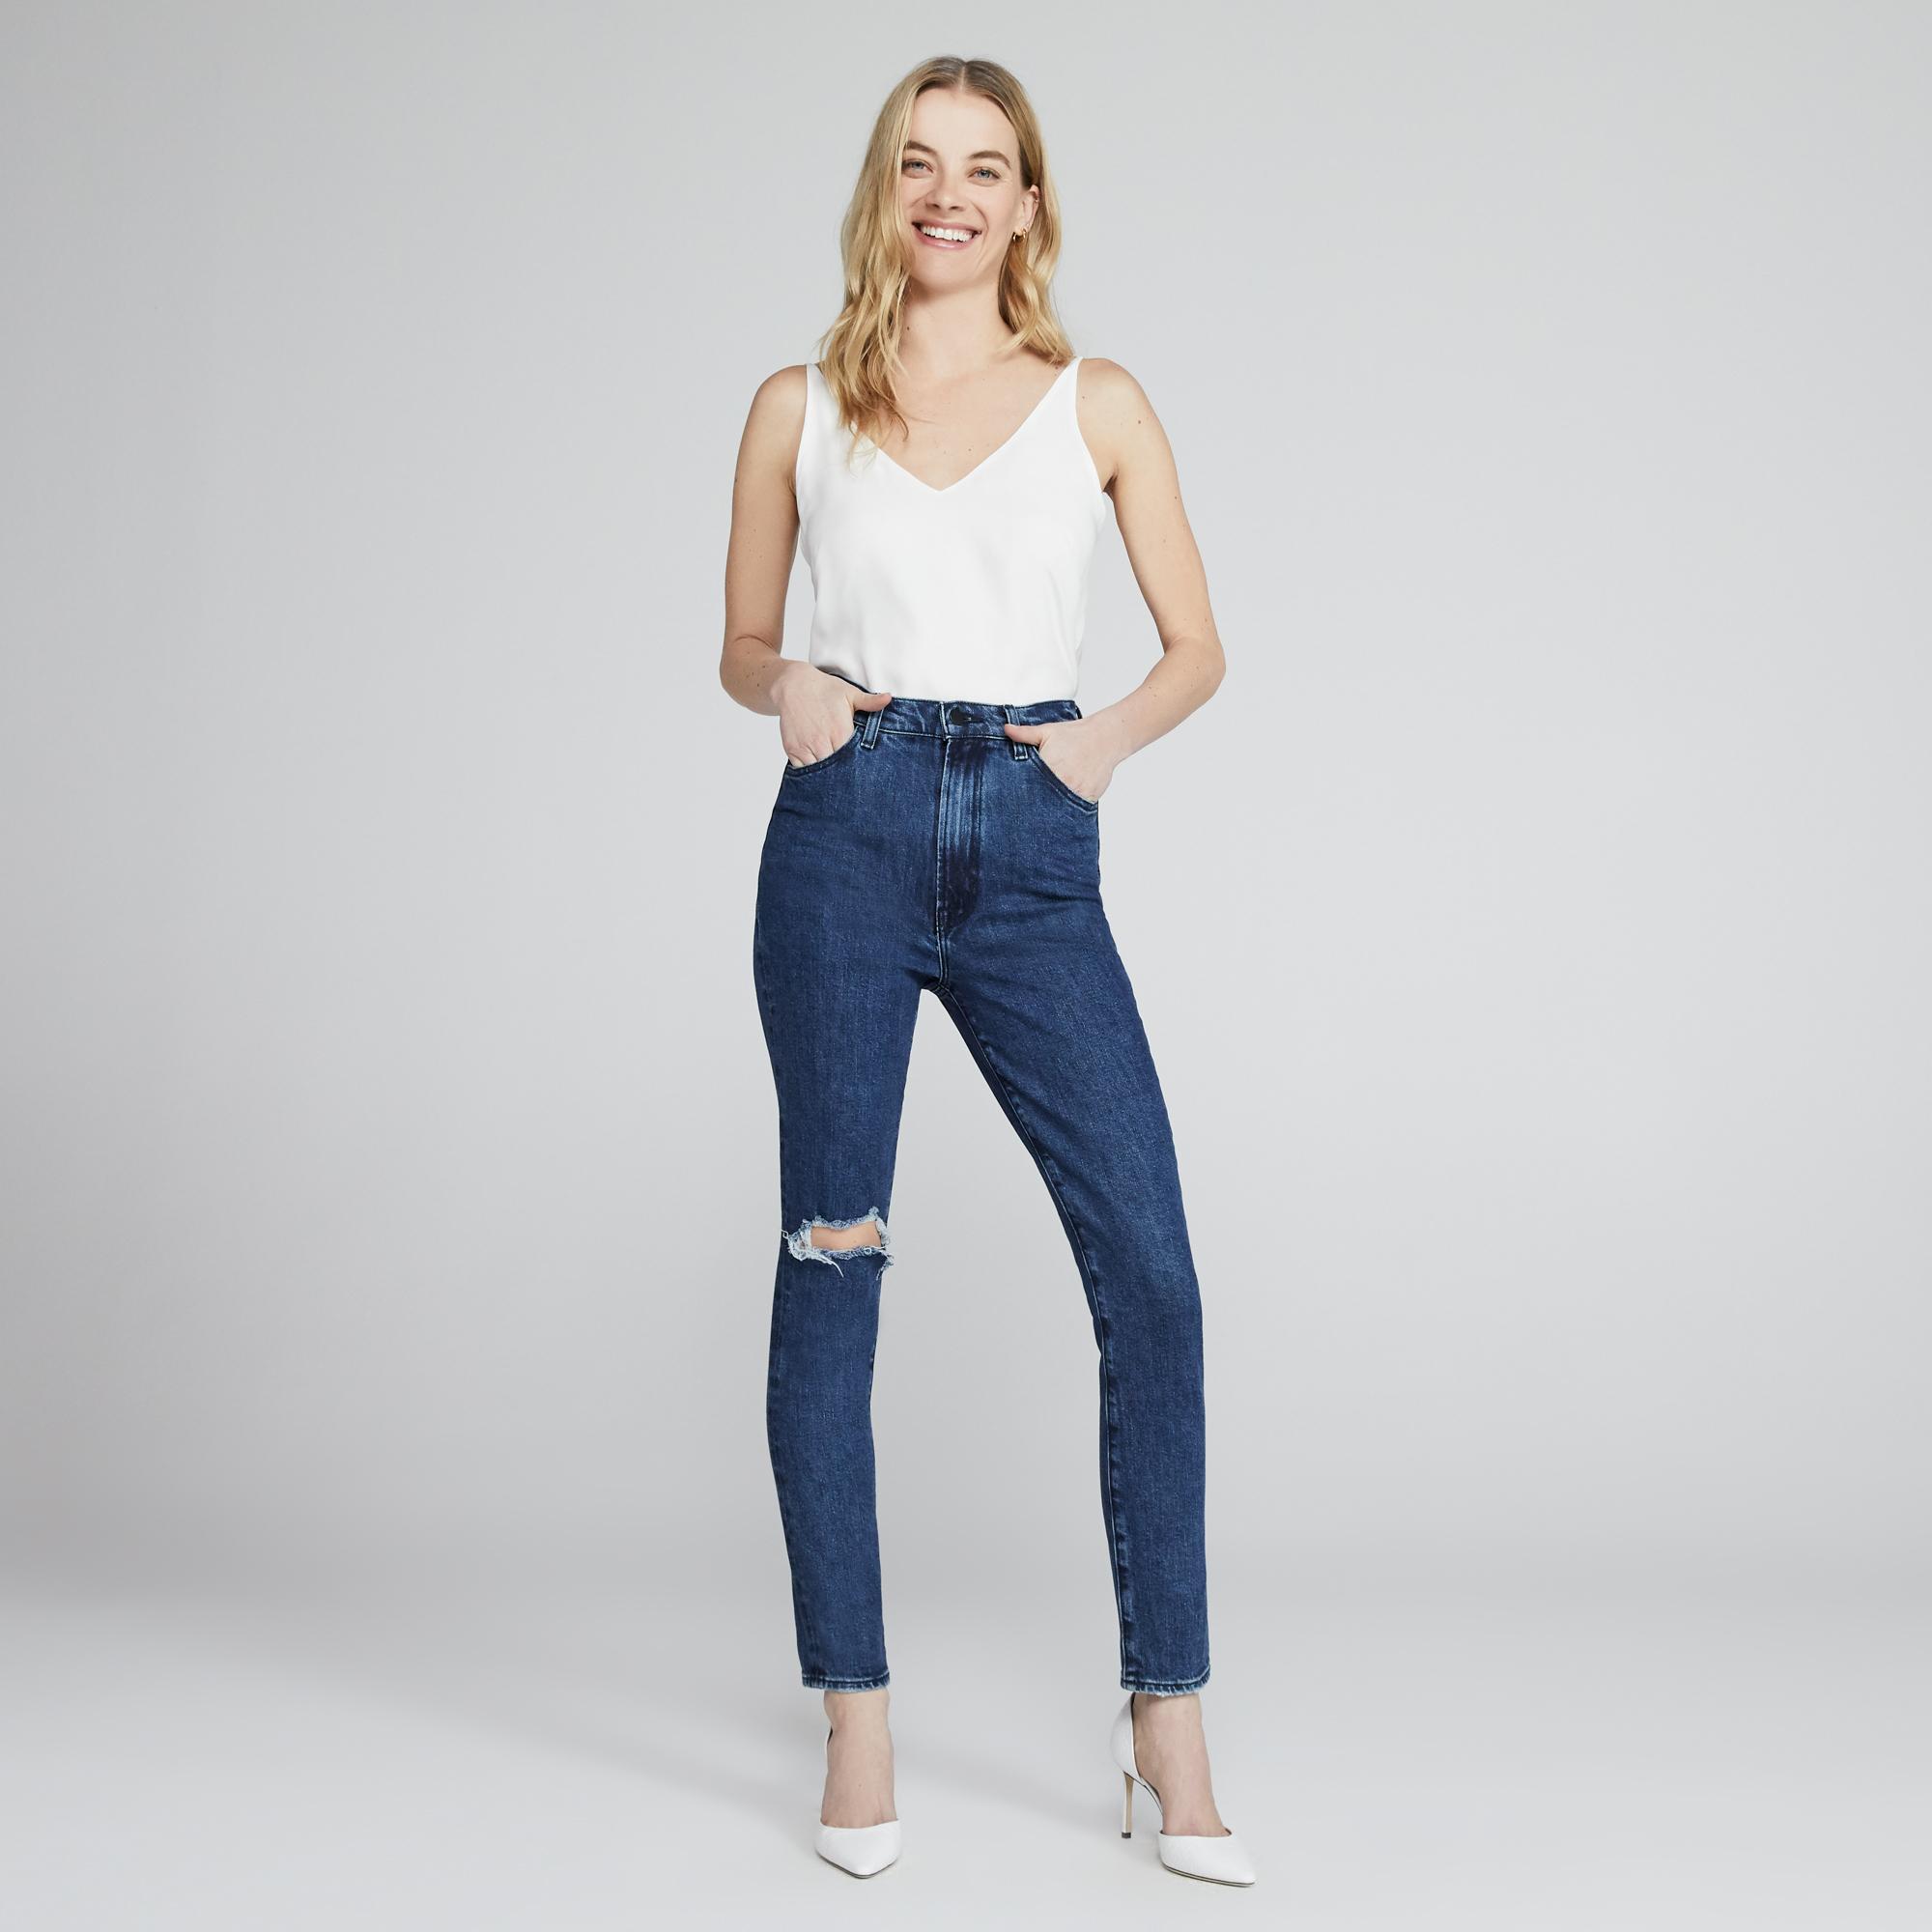 12 inch rise jeans